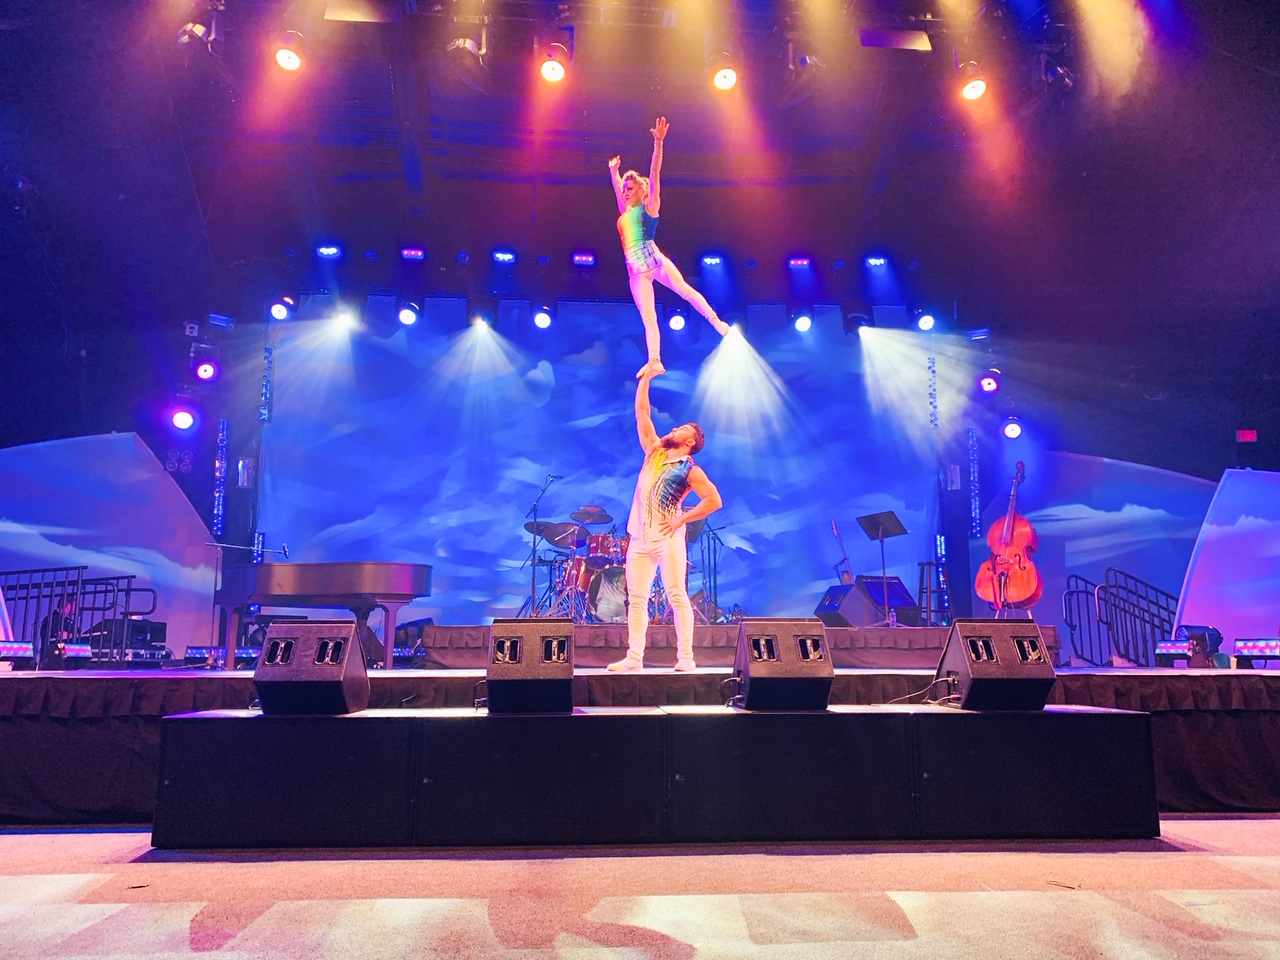 acrobats performing at Epcot festival of the arts